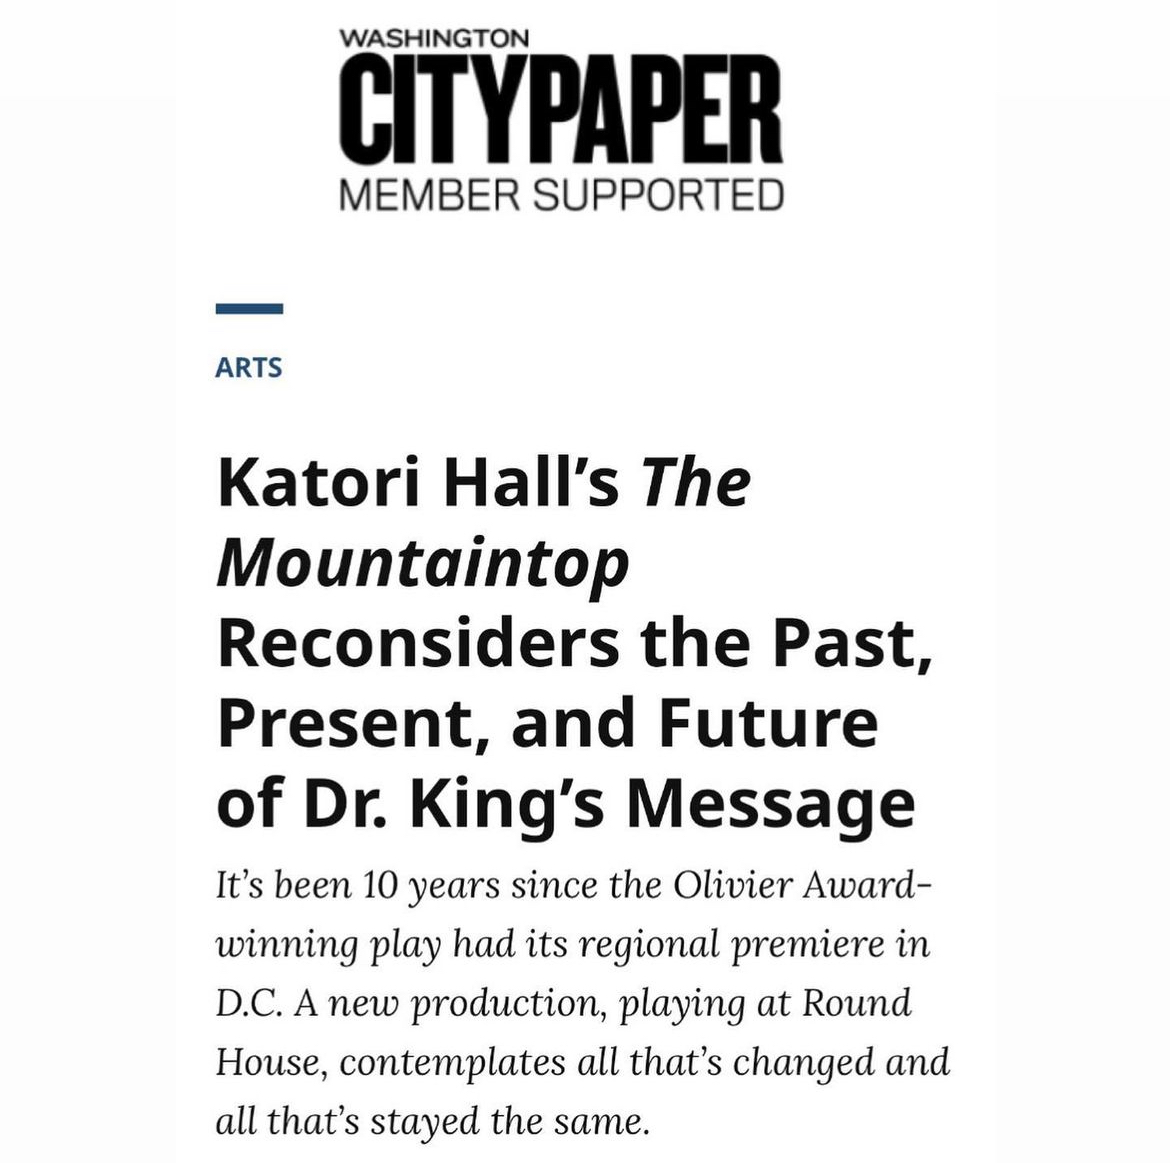 Washington City Paper Feature: Interview with Katori Hall (The Mountaintop)